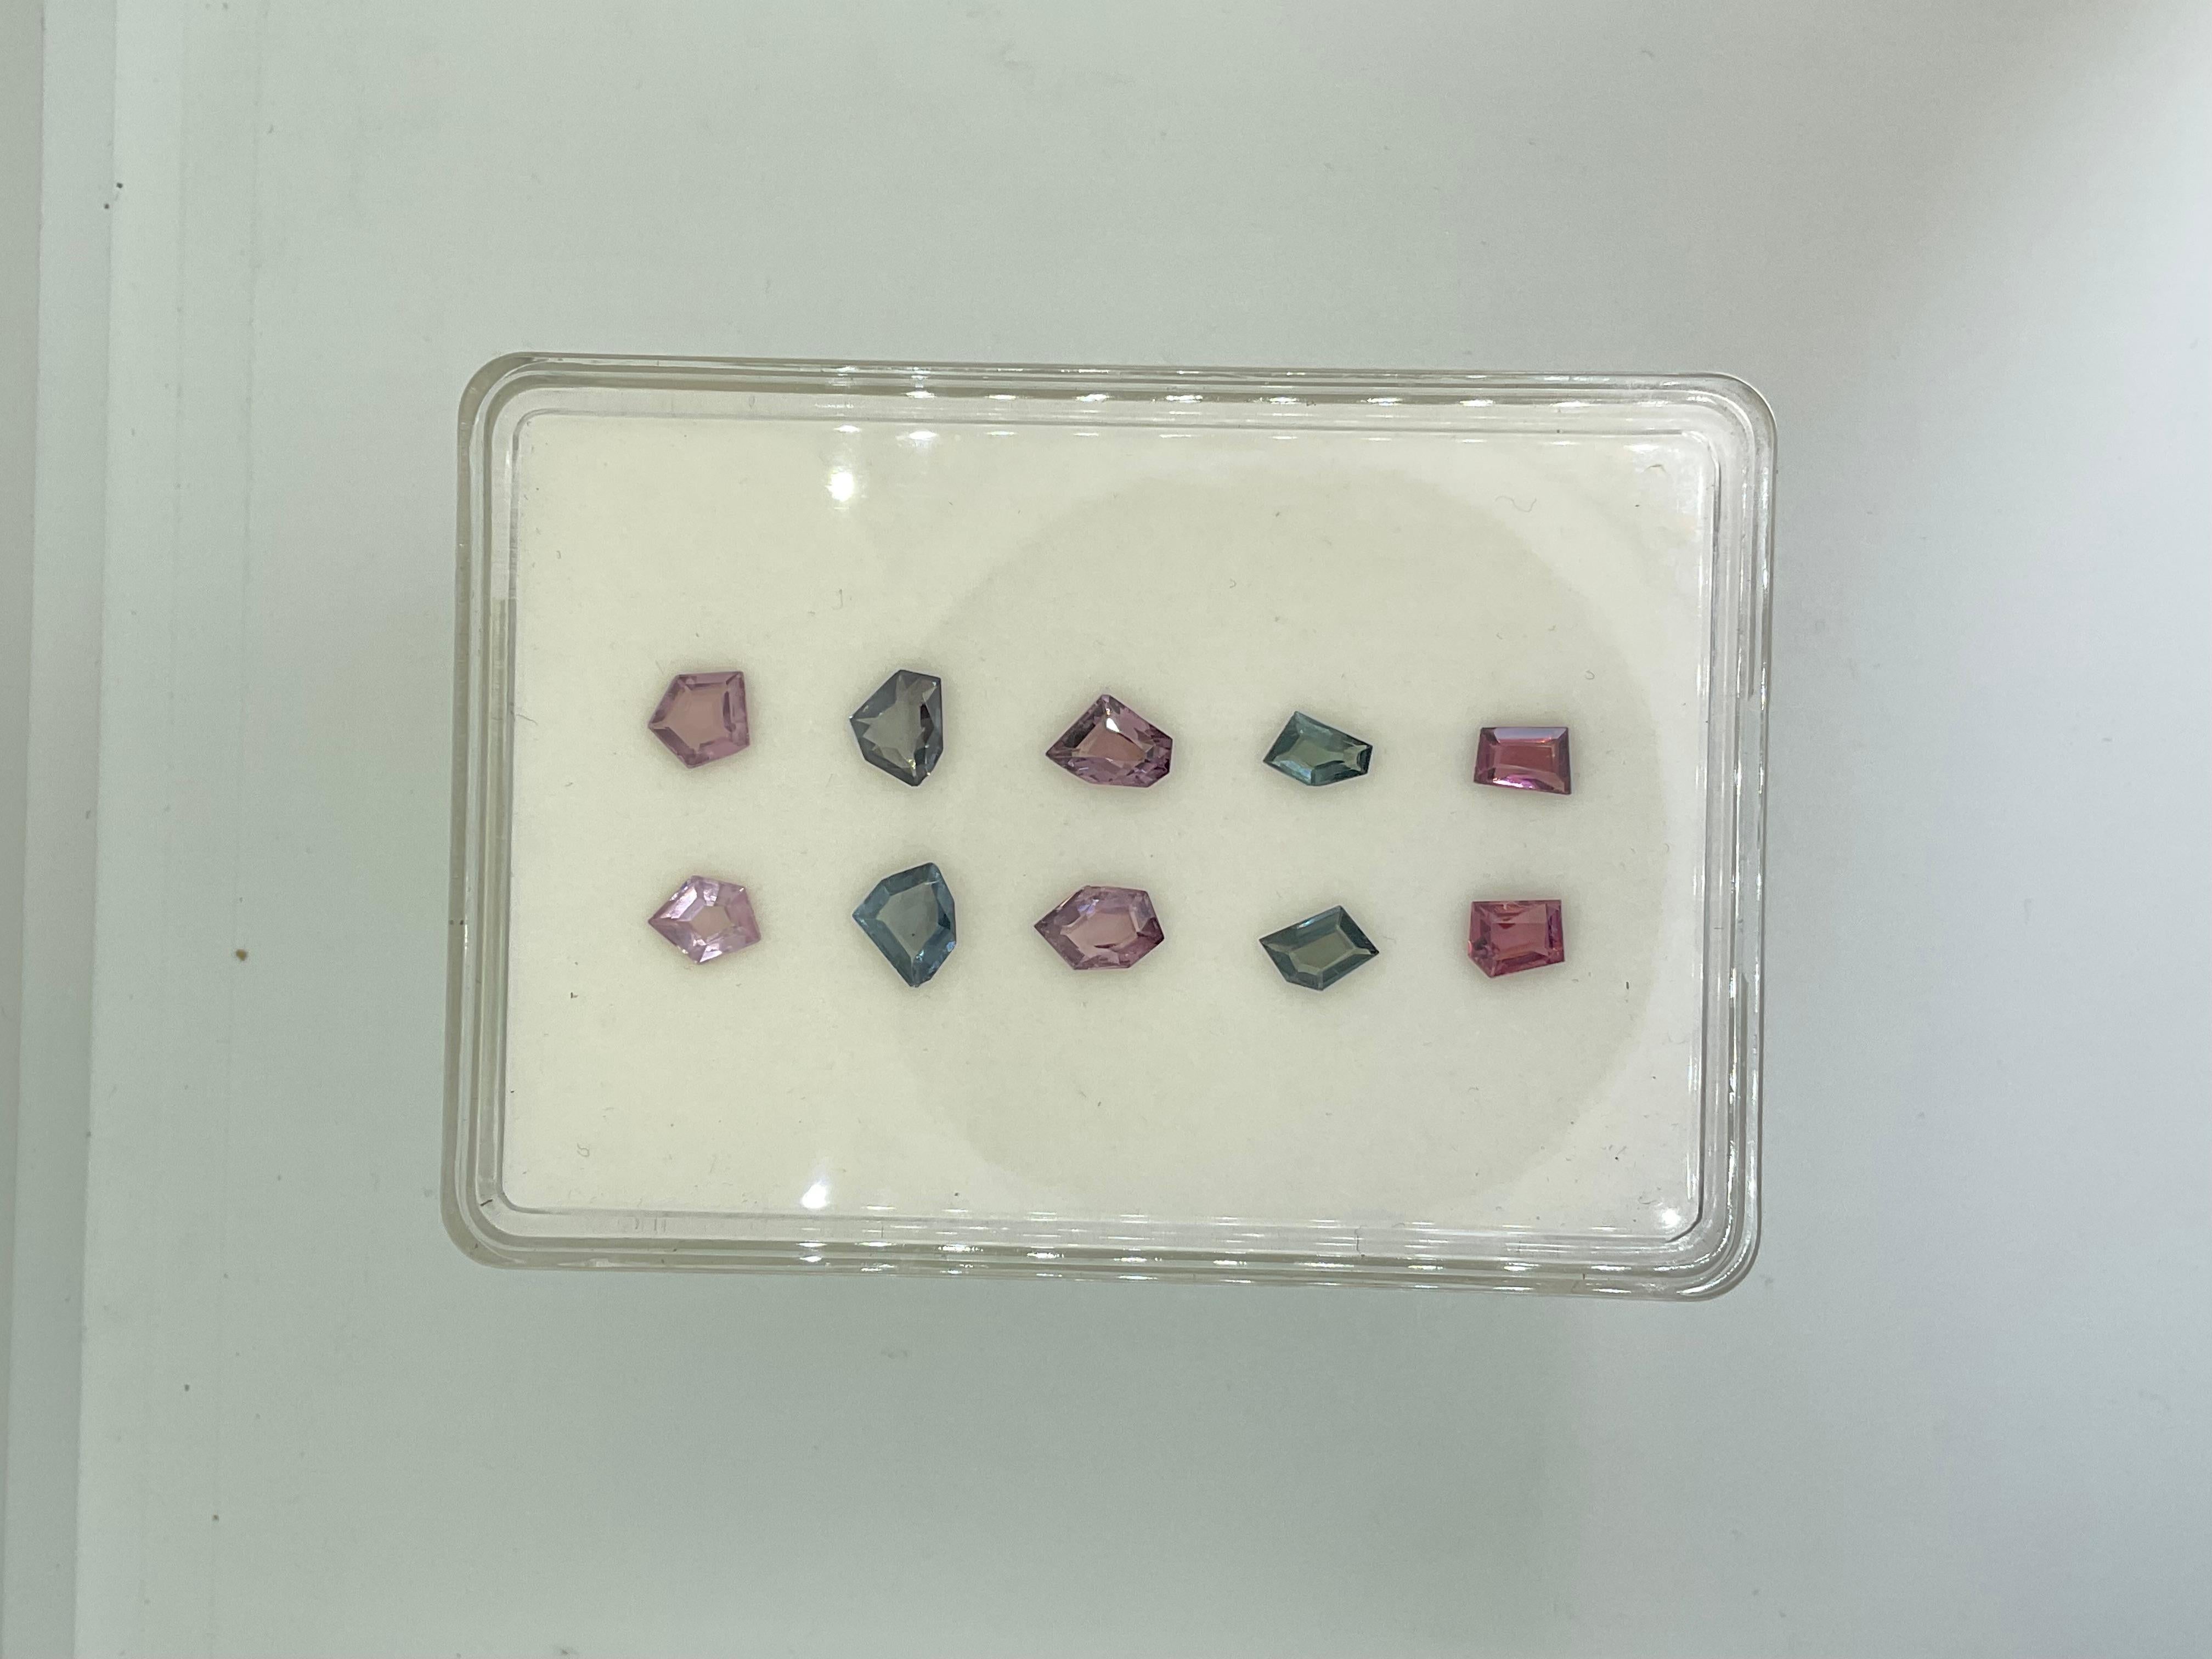 Rough Cut 8.05 Carats Grey & Pink Spinel Fancy Cut Stone Natural Gem For Top Fine Jewelry For Sale